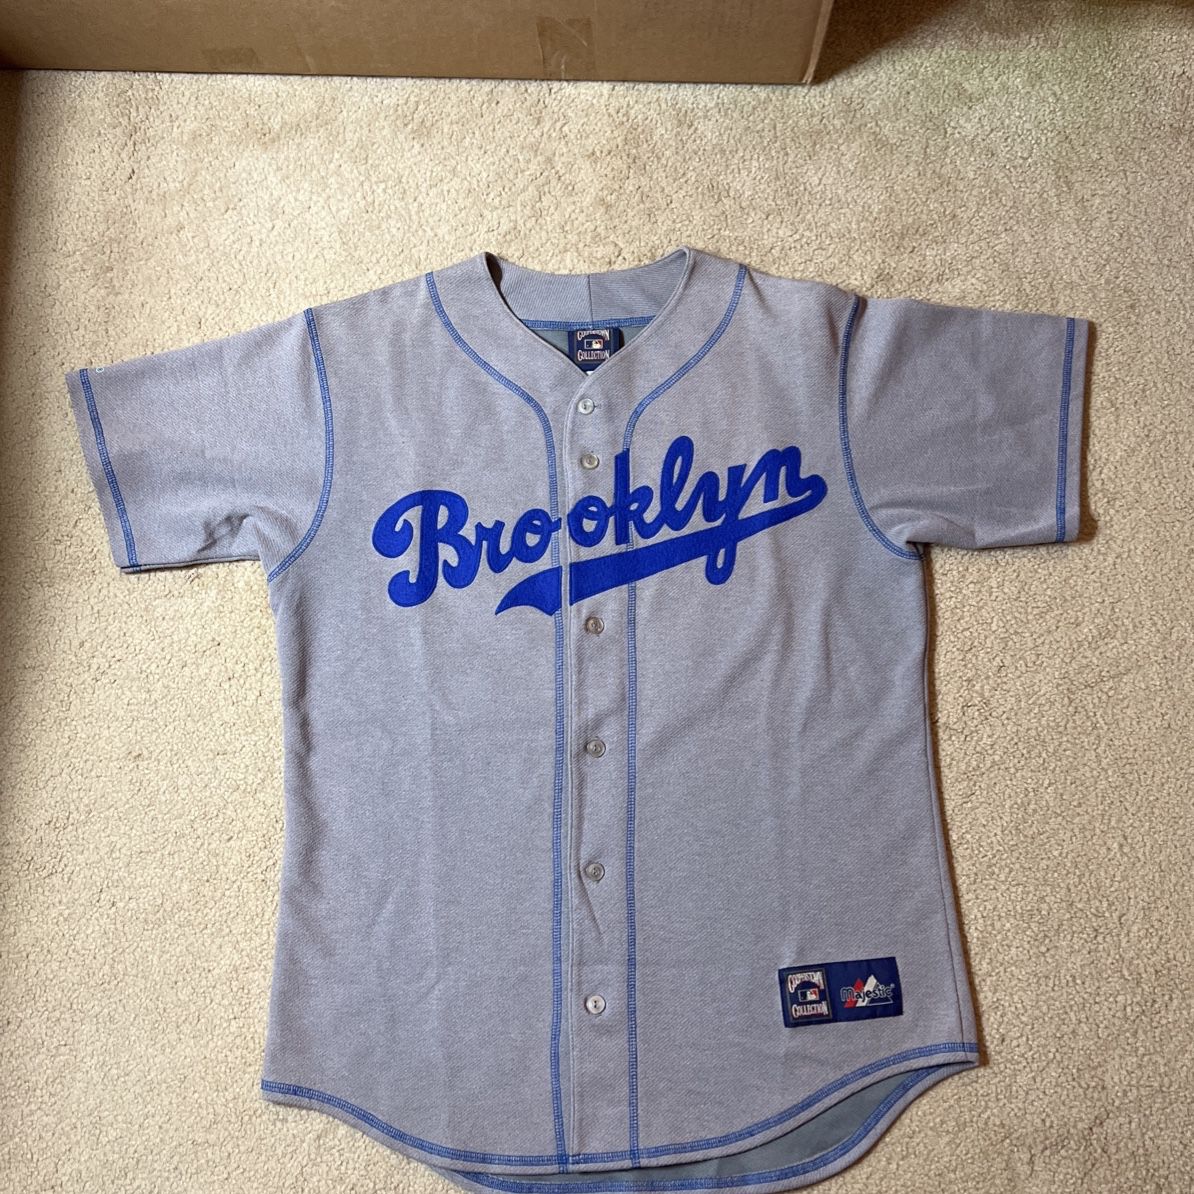 Los Angeles Dodgers/ Brooklyn Dodgers #42 Jackie Robinson 1955 Jersey SGA  Brand New!! Never Been Used!! Size: M (Medium) for Sale in Bell Gardens, CA  - OfferUp